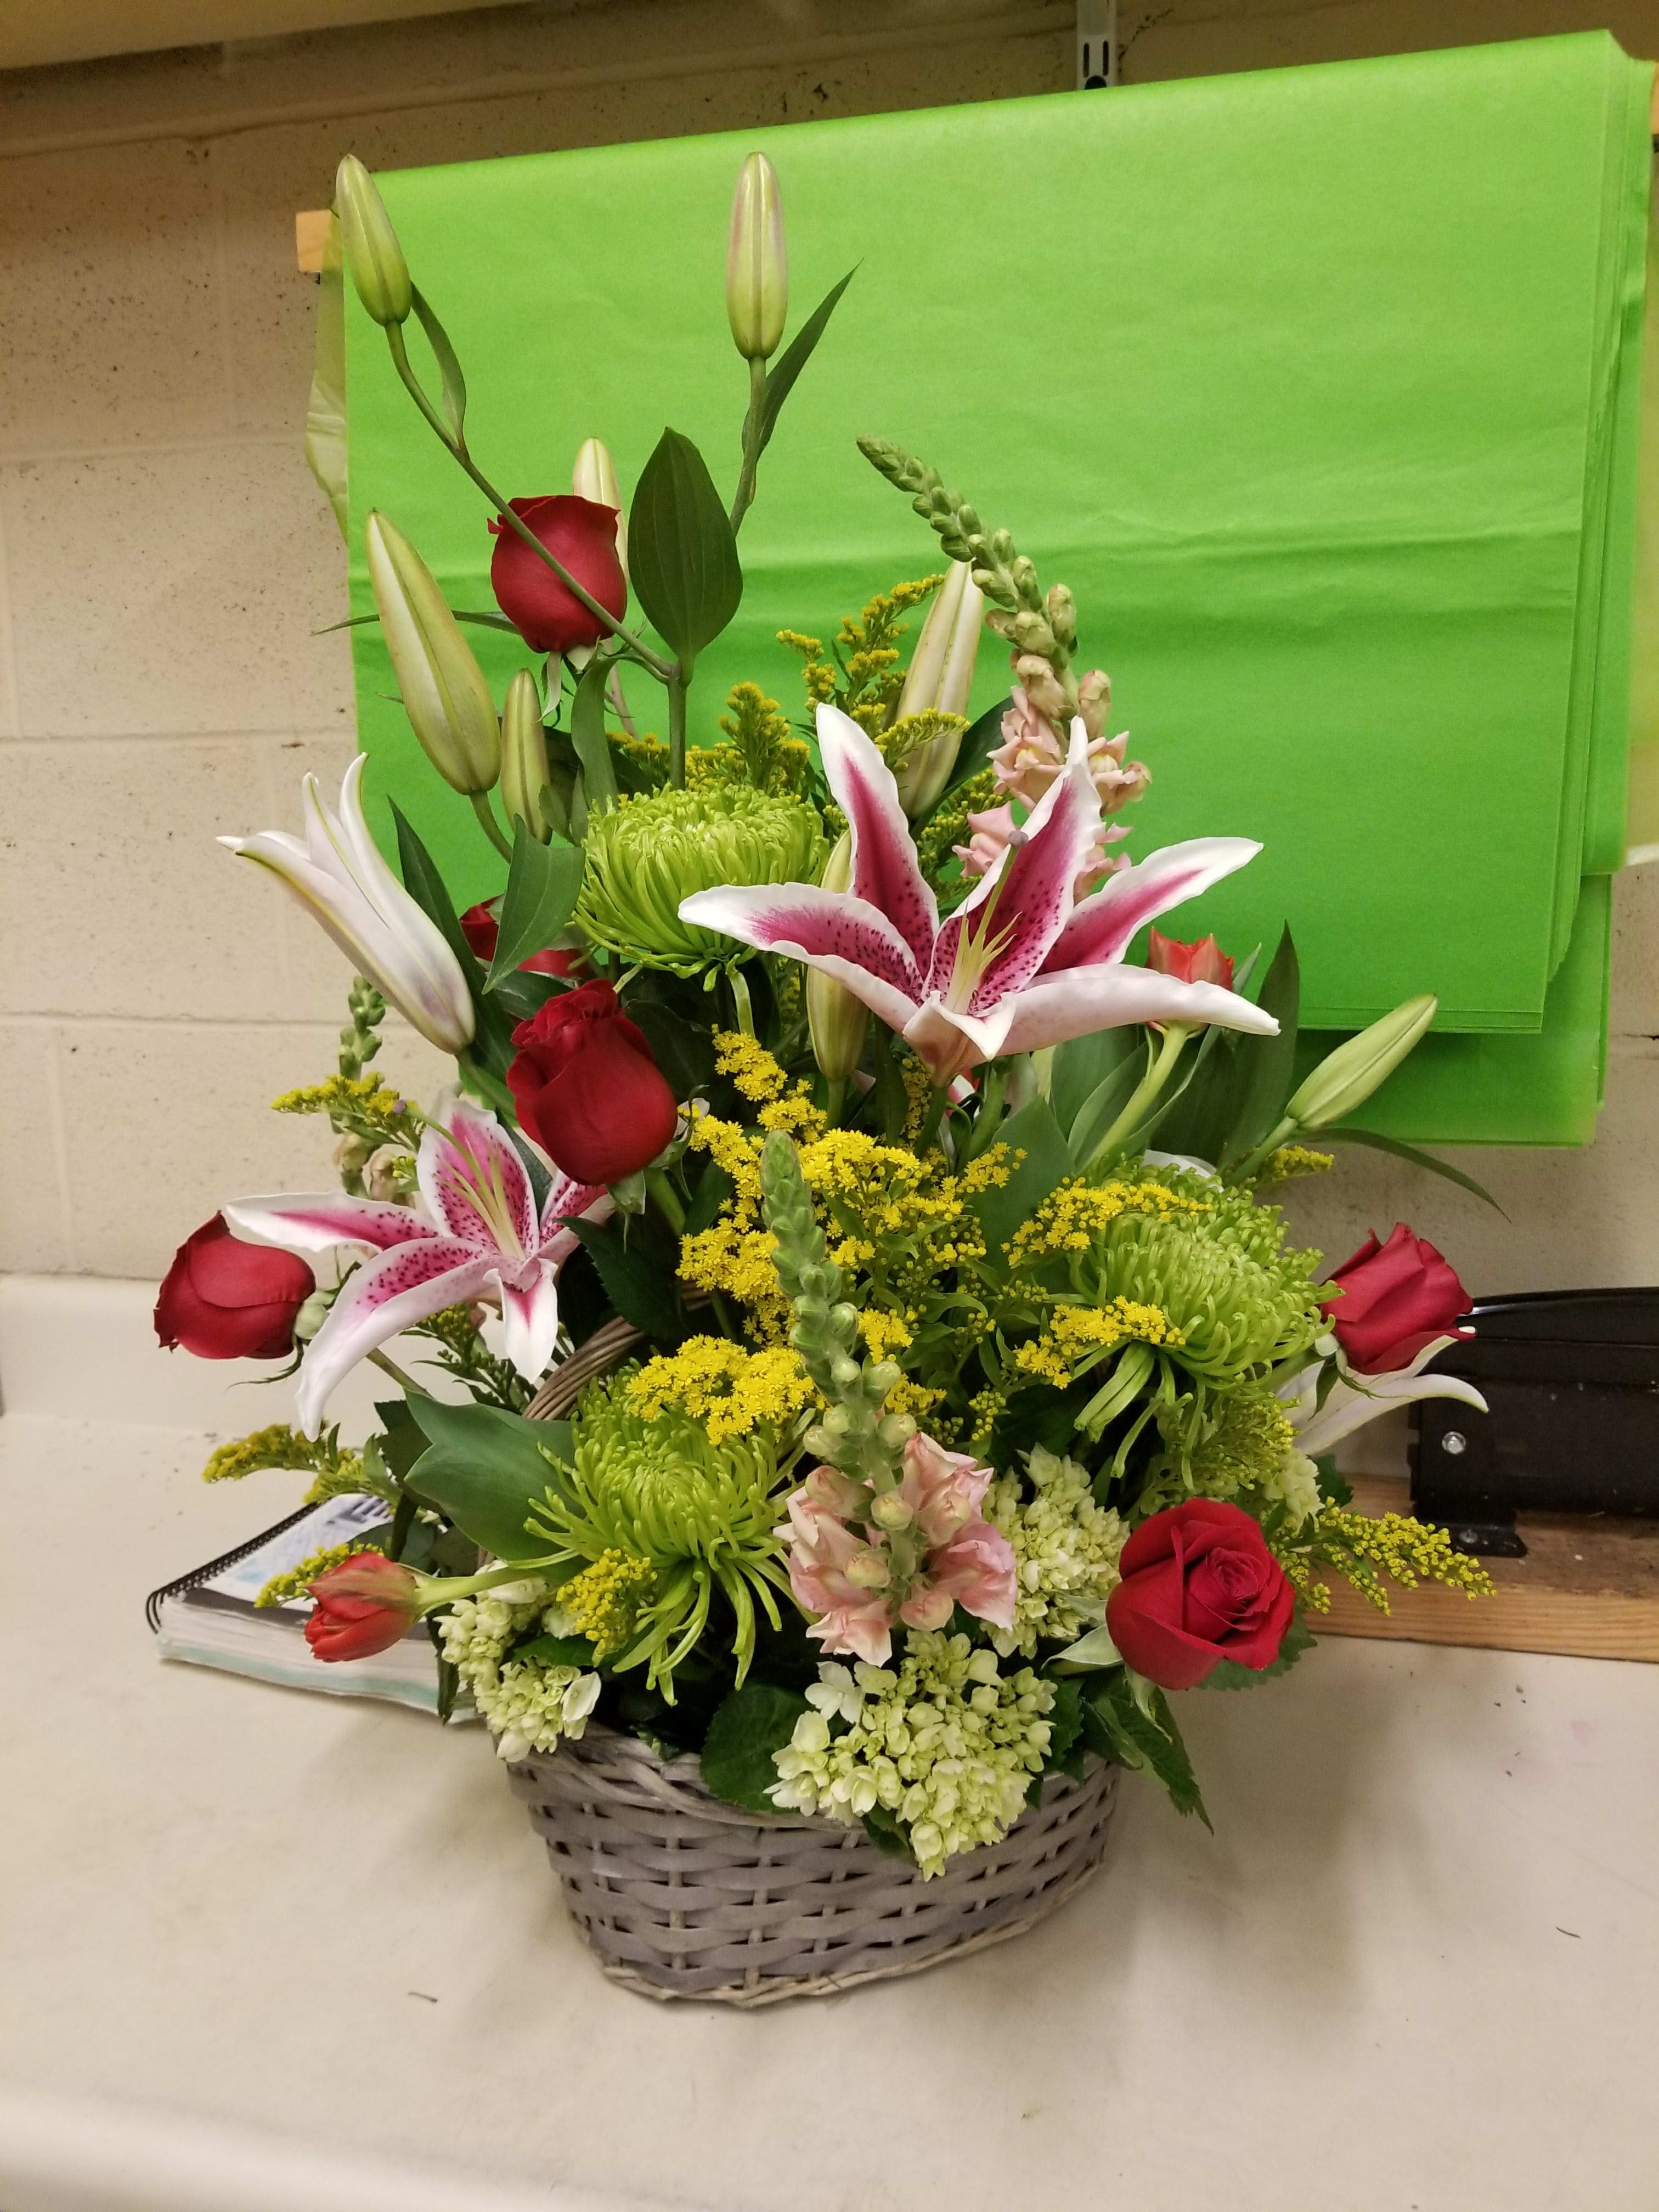 Lillies and Roses - Big rubrium lilies,  pretty red roses, peach snapdragons, yellow solidago and green fugj mums that will put a smile on your person you want to please face for sure!